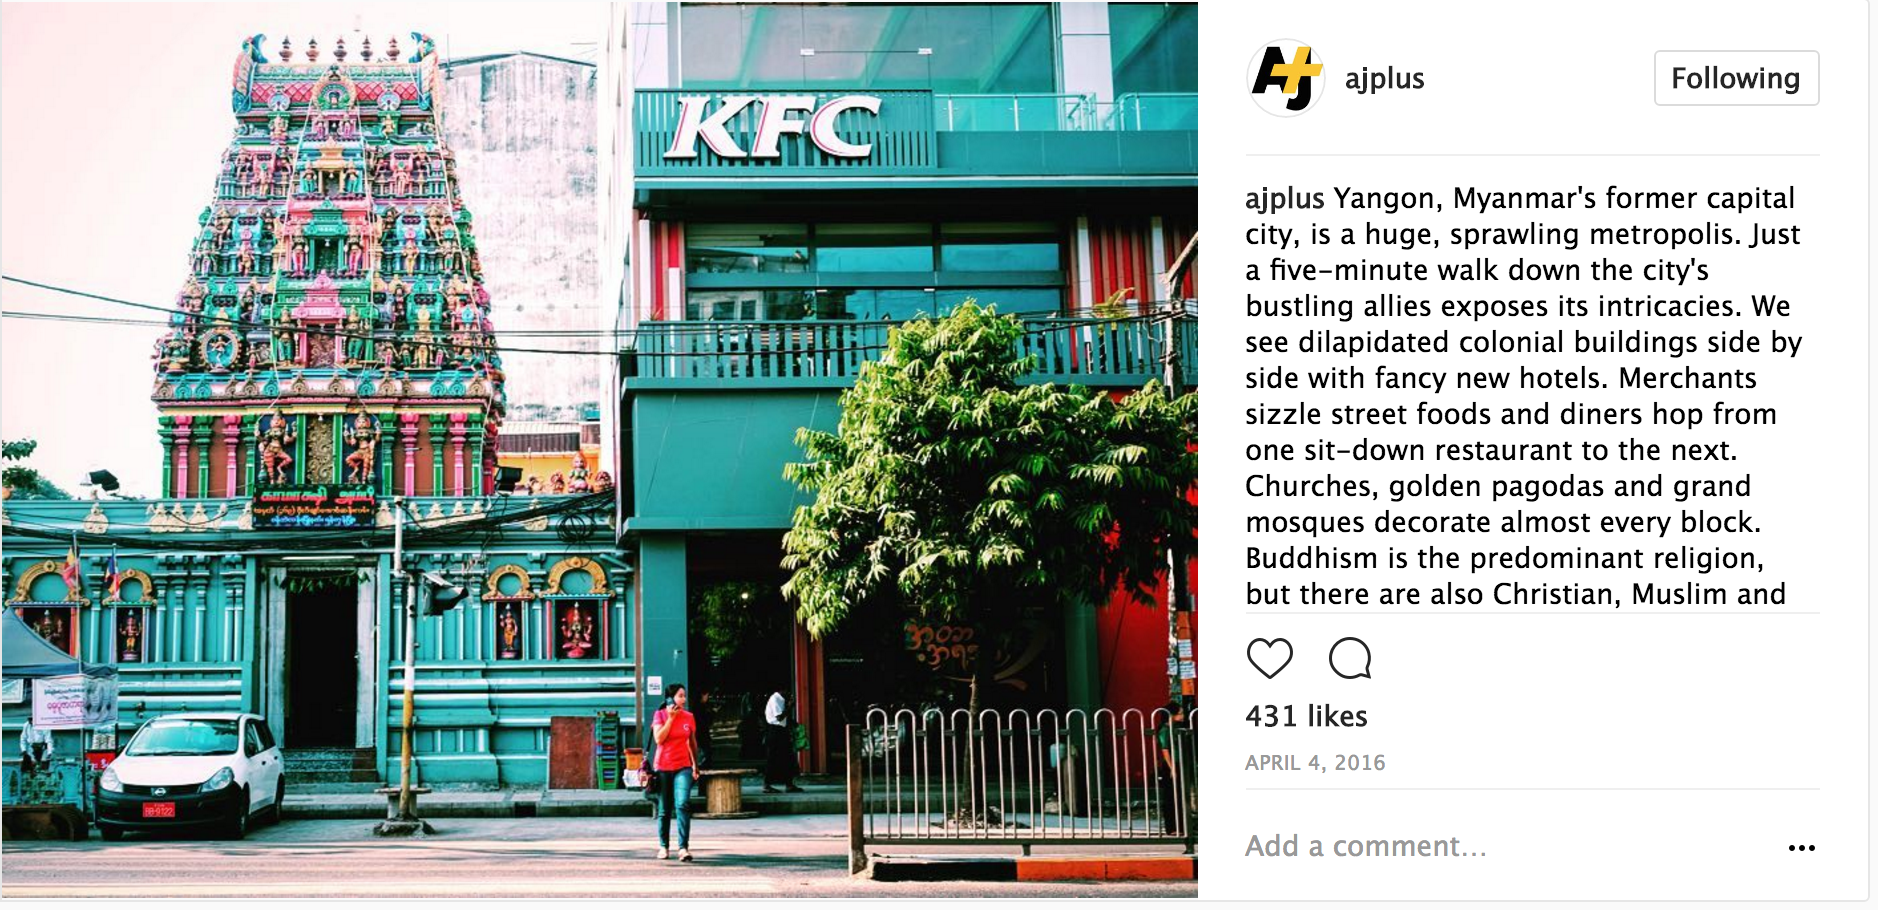  Part of a series I posted about cultural and religious diversity in Myanmar for AJ+'s Instagram account 